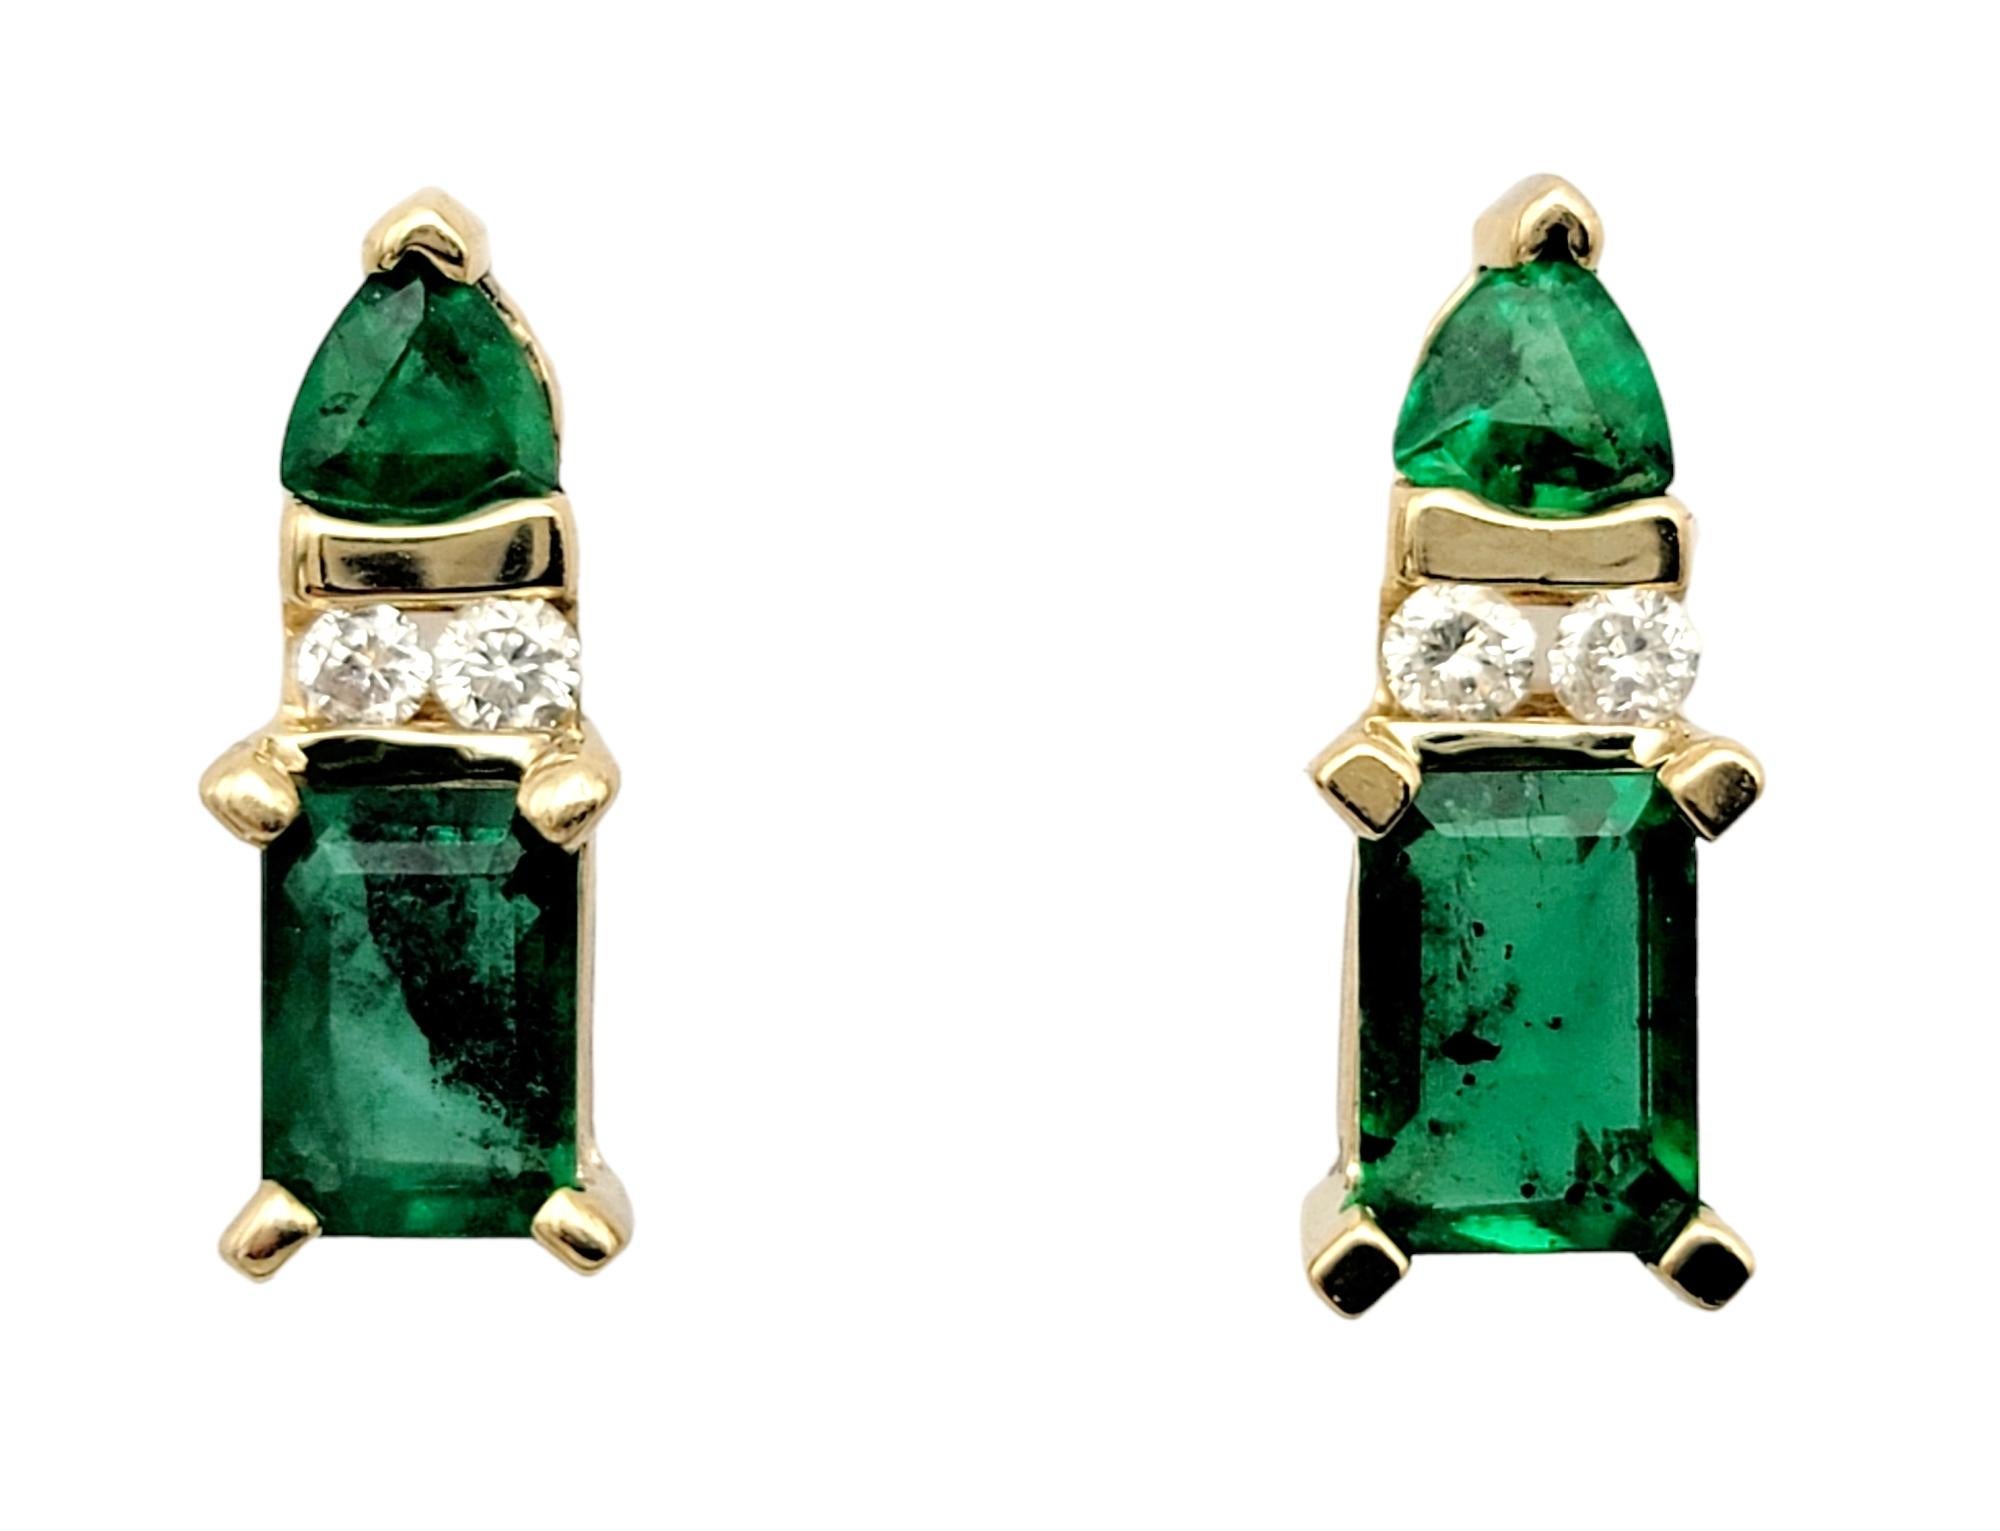 Pretty emerald and diamond studs in an elongated vertical layout. The bright green stones paired with the icy white diamonds give just the right pop of color for everyday wear.

Earring type: Stud
Metal: 14K Yellow Gold
Natural Emerald: 1.72 carat